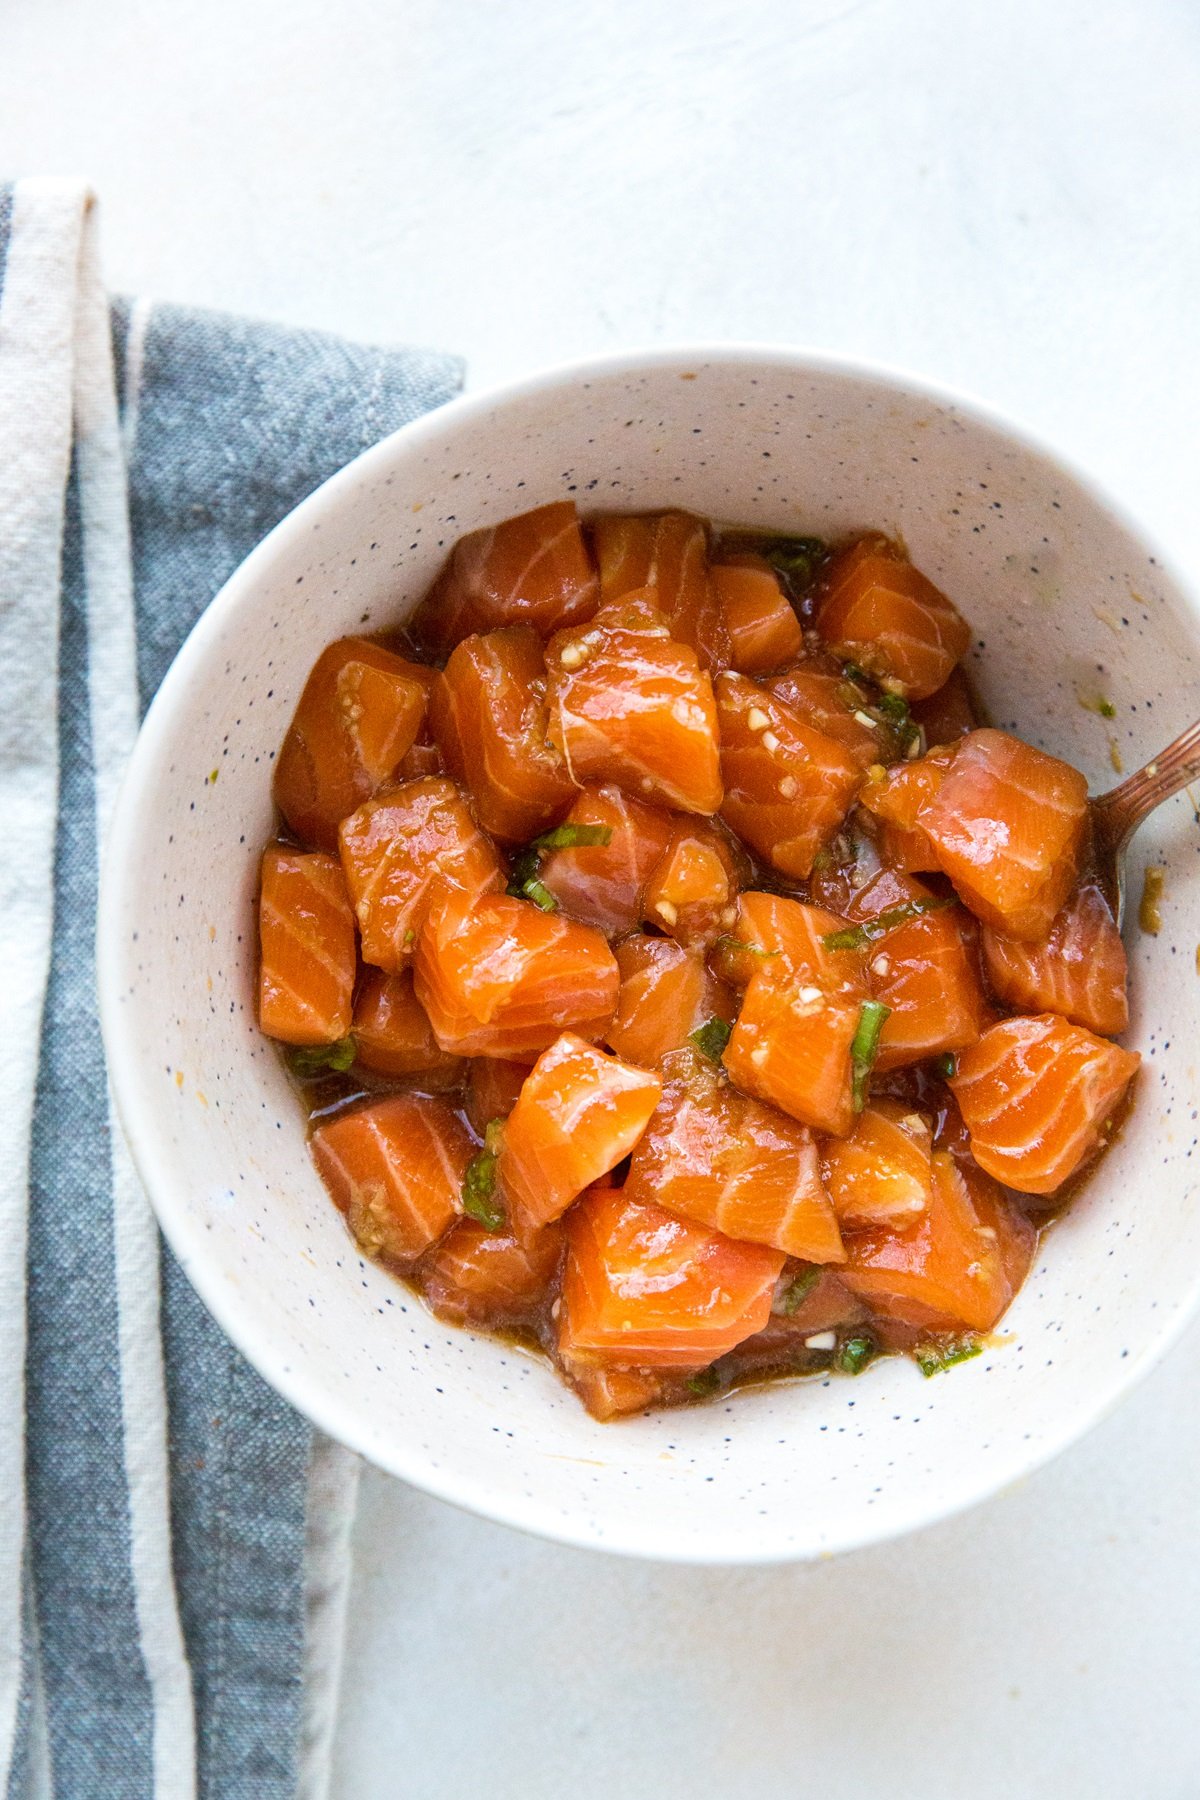 How To Make A Salmon Poke Bowl At Home